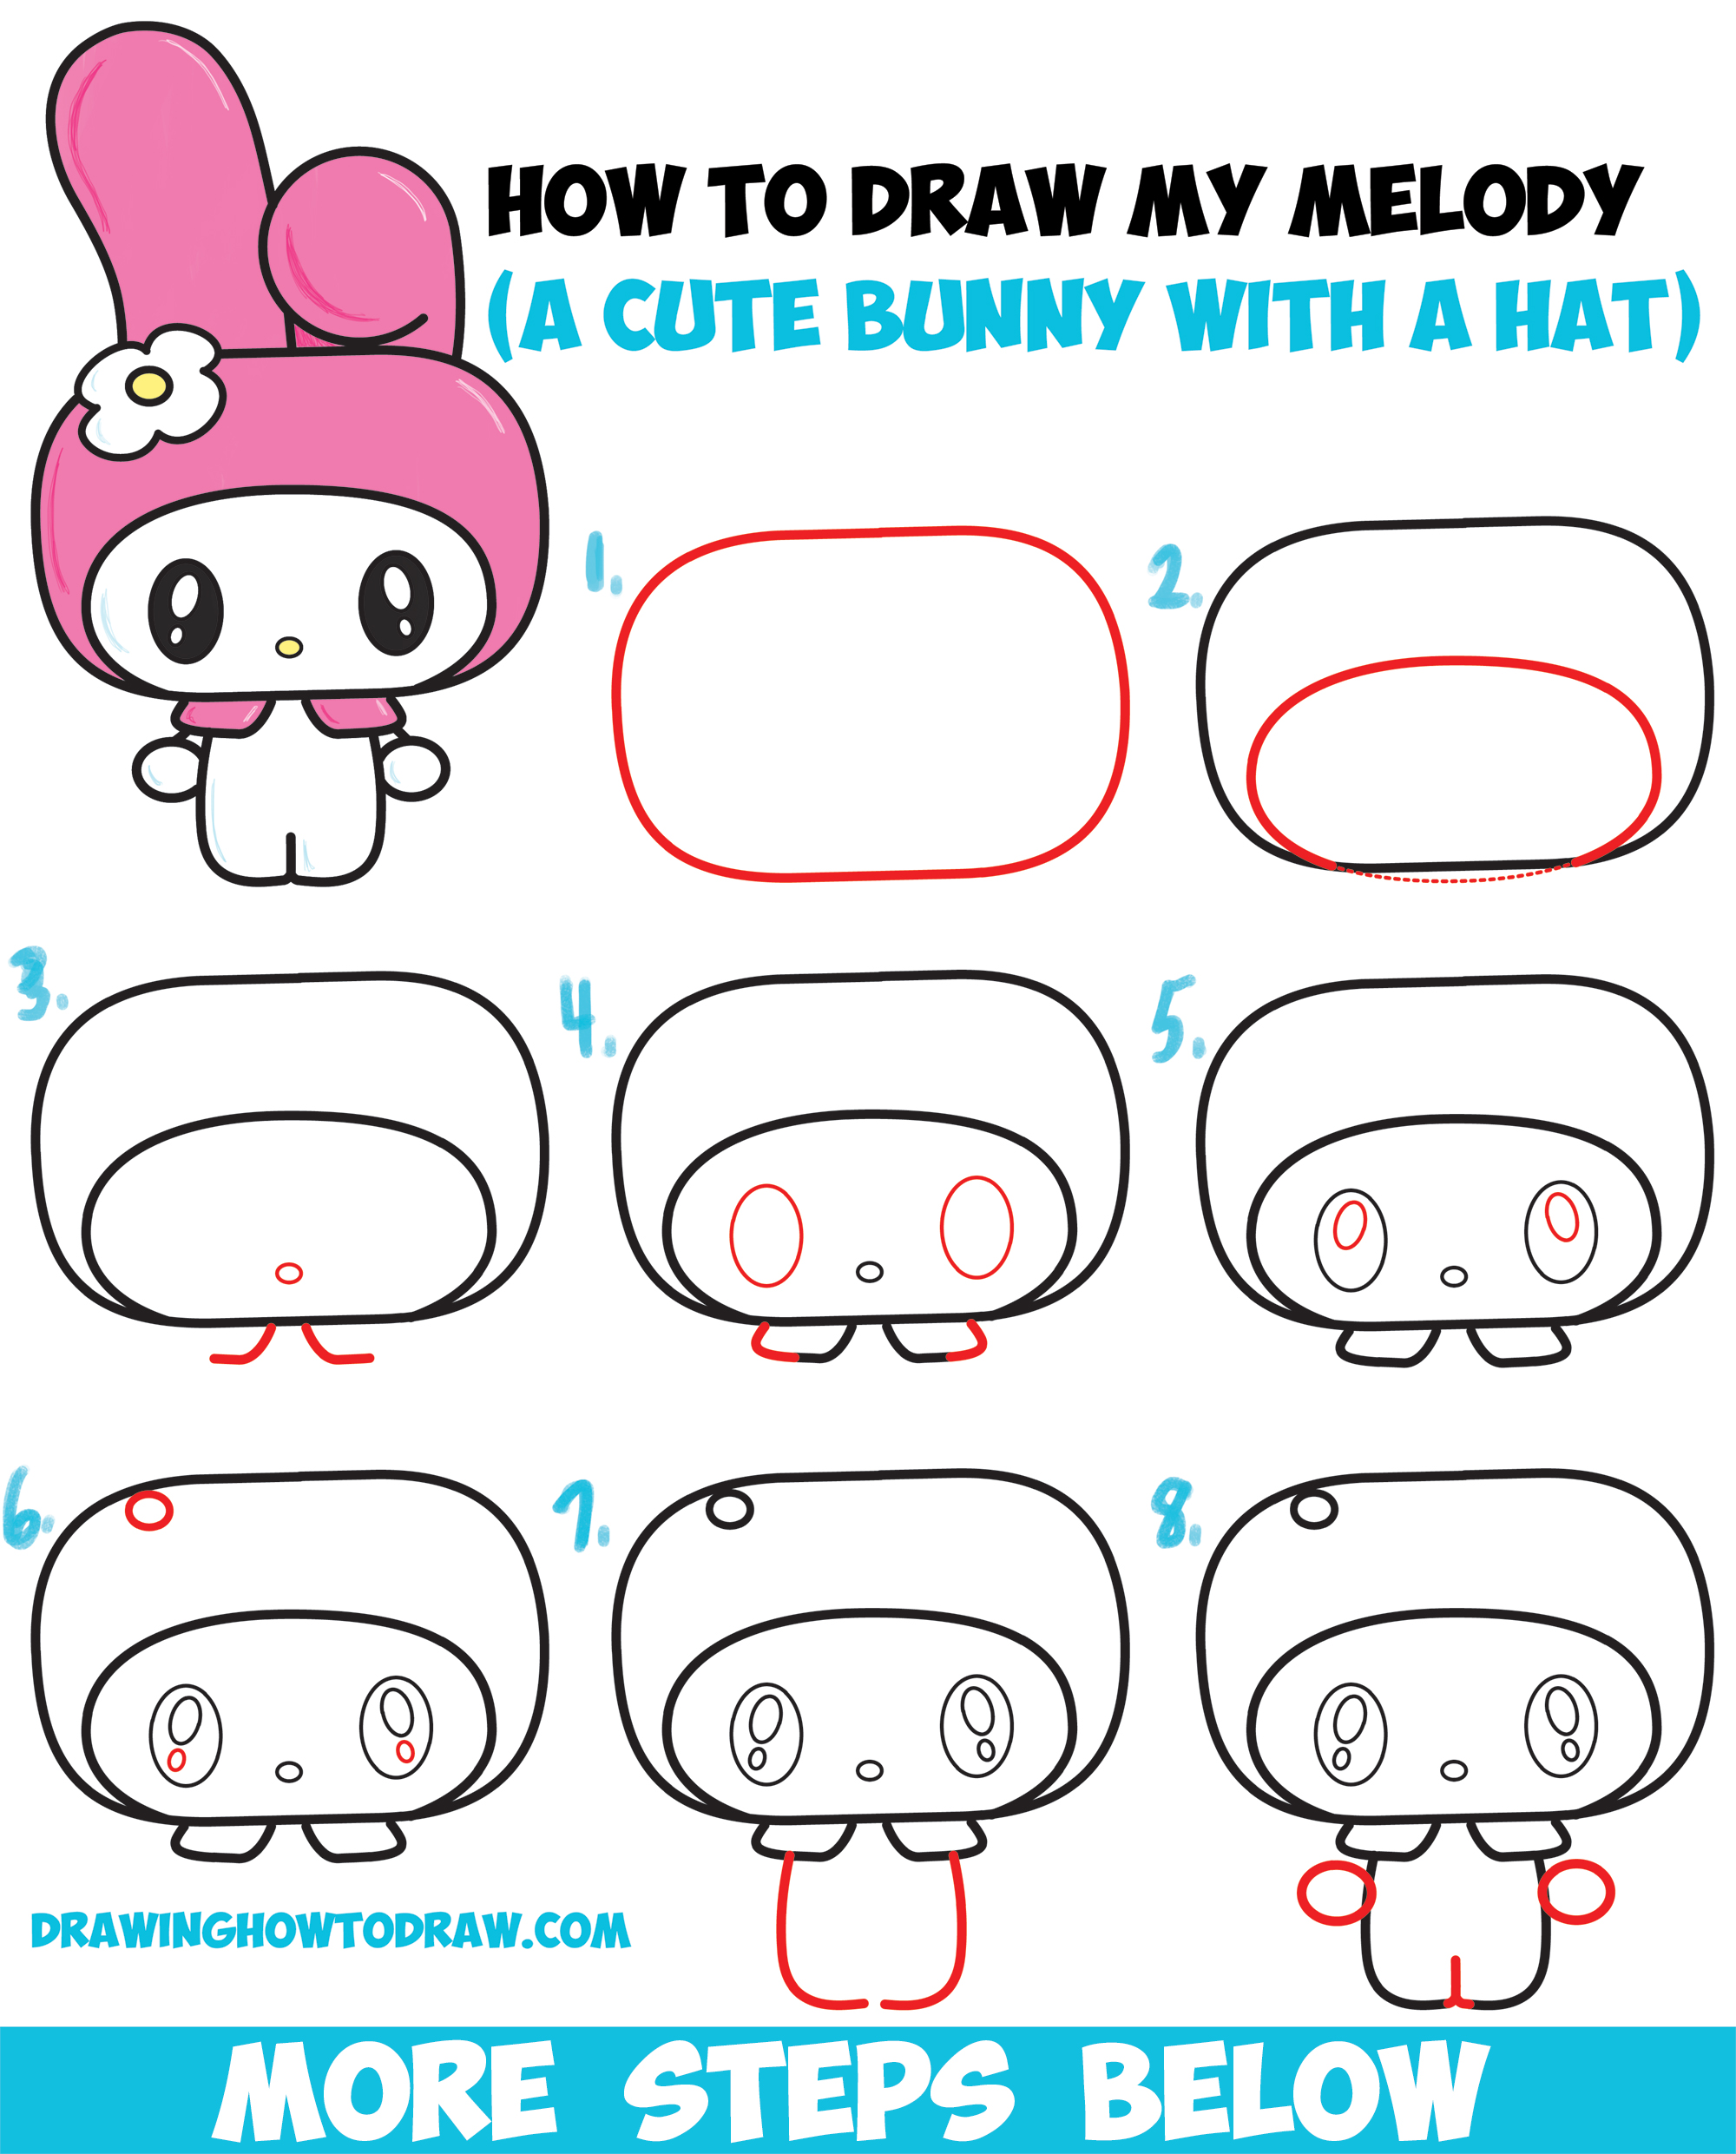 how to draw my melody kawaii chibi version cute bunny in a hat hood easy step by step drawing tutorial for kids beginners